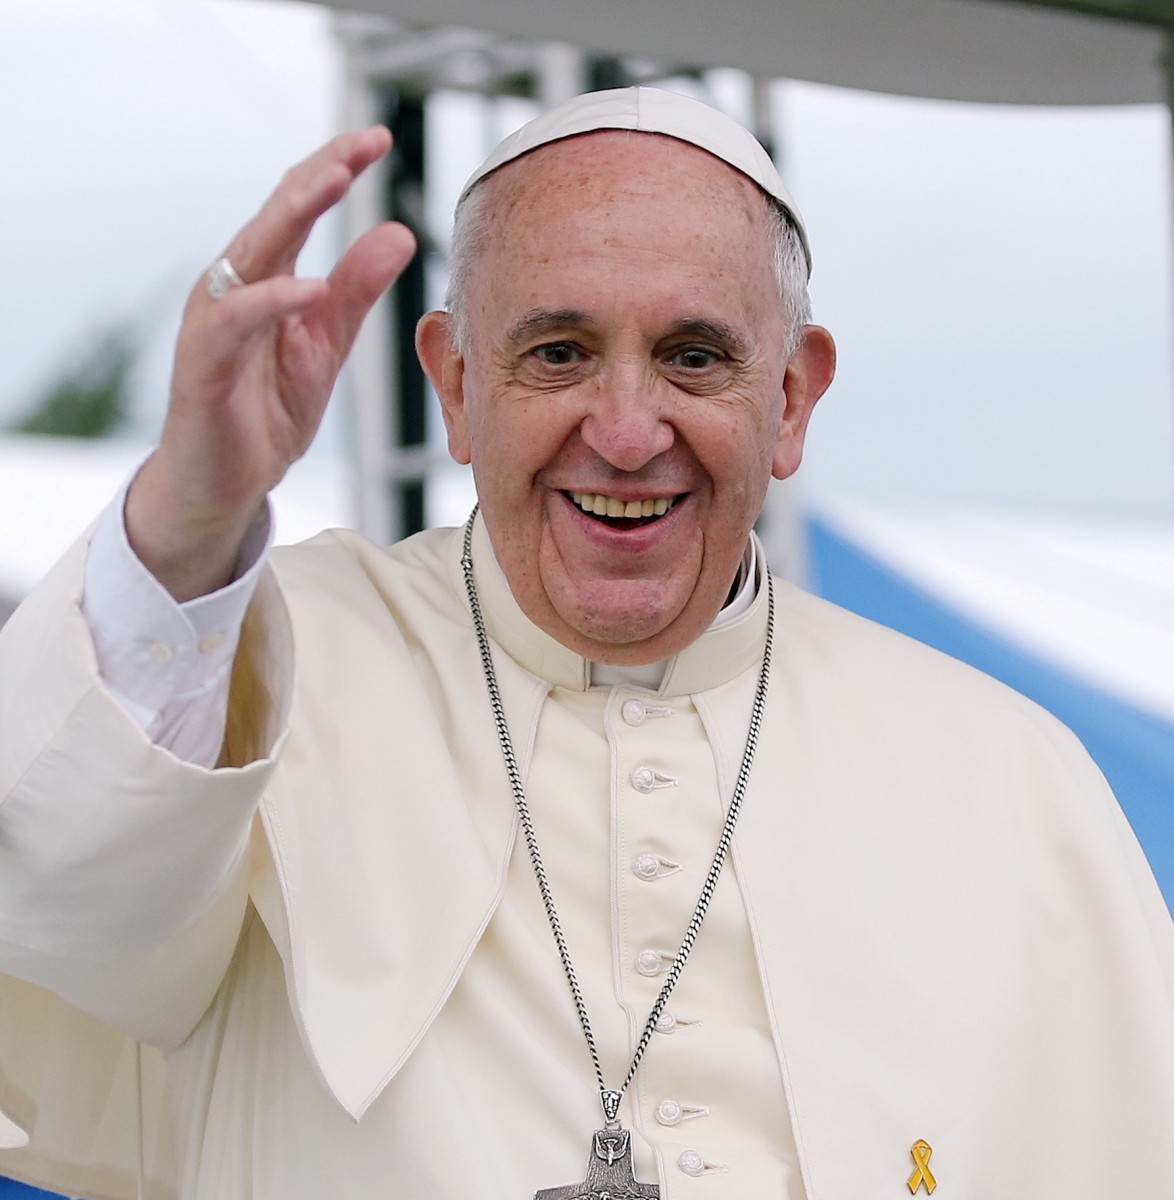 Campaign Offers Pope Francis  Million to Go Vegan for Lent